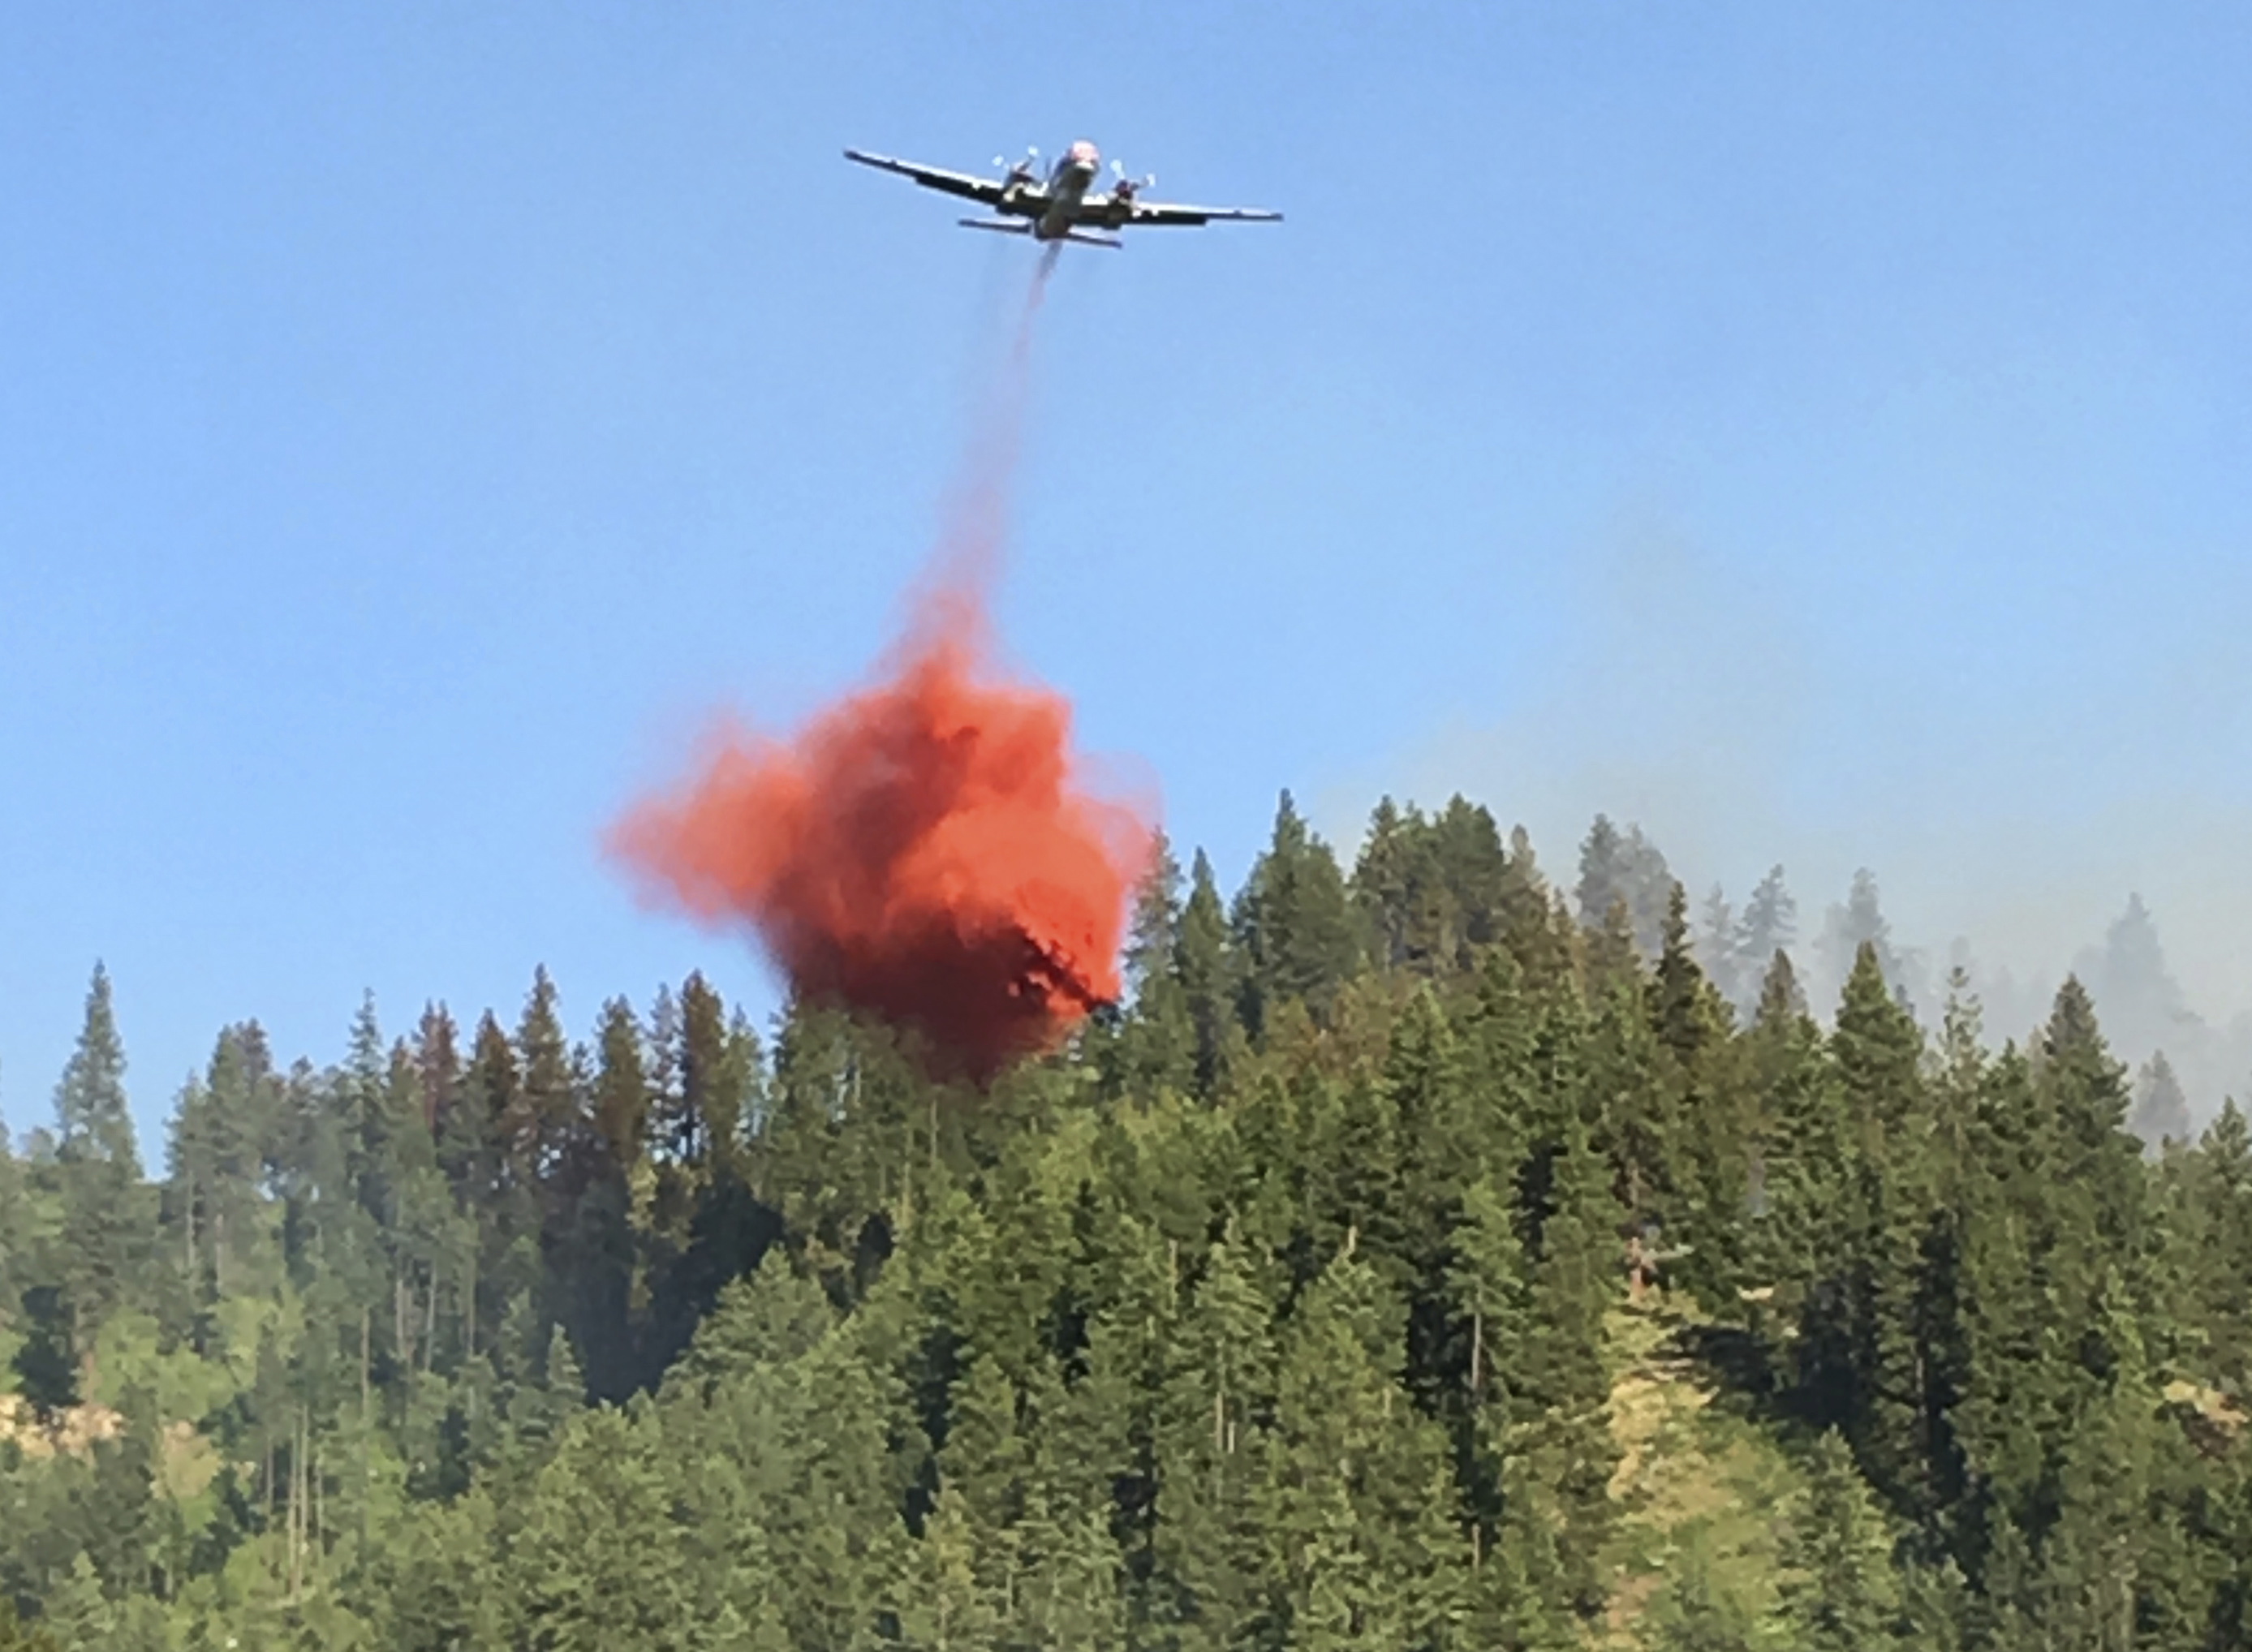 In this May 23, 2017 photo provided by Chelan County Fire District 3, an air tanker drops fire retardant on forest land as a wildfire burns near Leavenworth, Wash. The wildfire that started at an old log-storage site has prompted evacuation orders for homes and cabins at a popular Washington state hiking and skiing destination, officials said Wednesday.